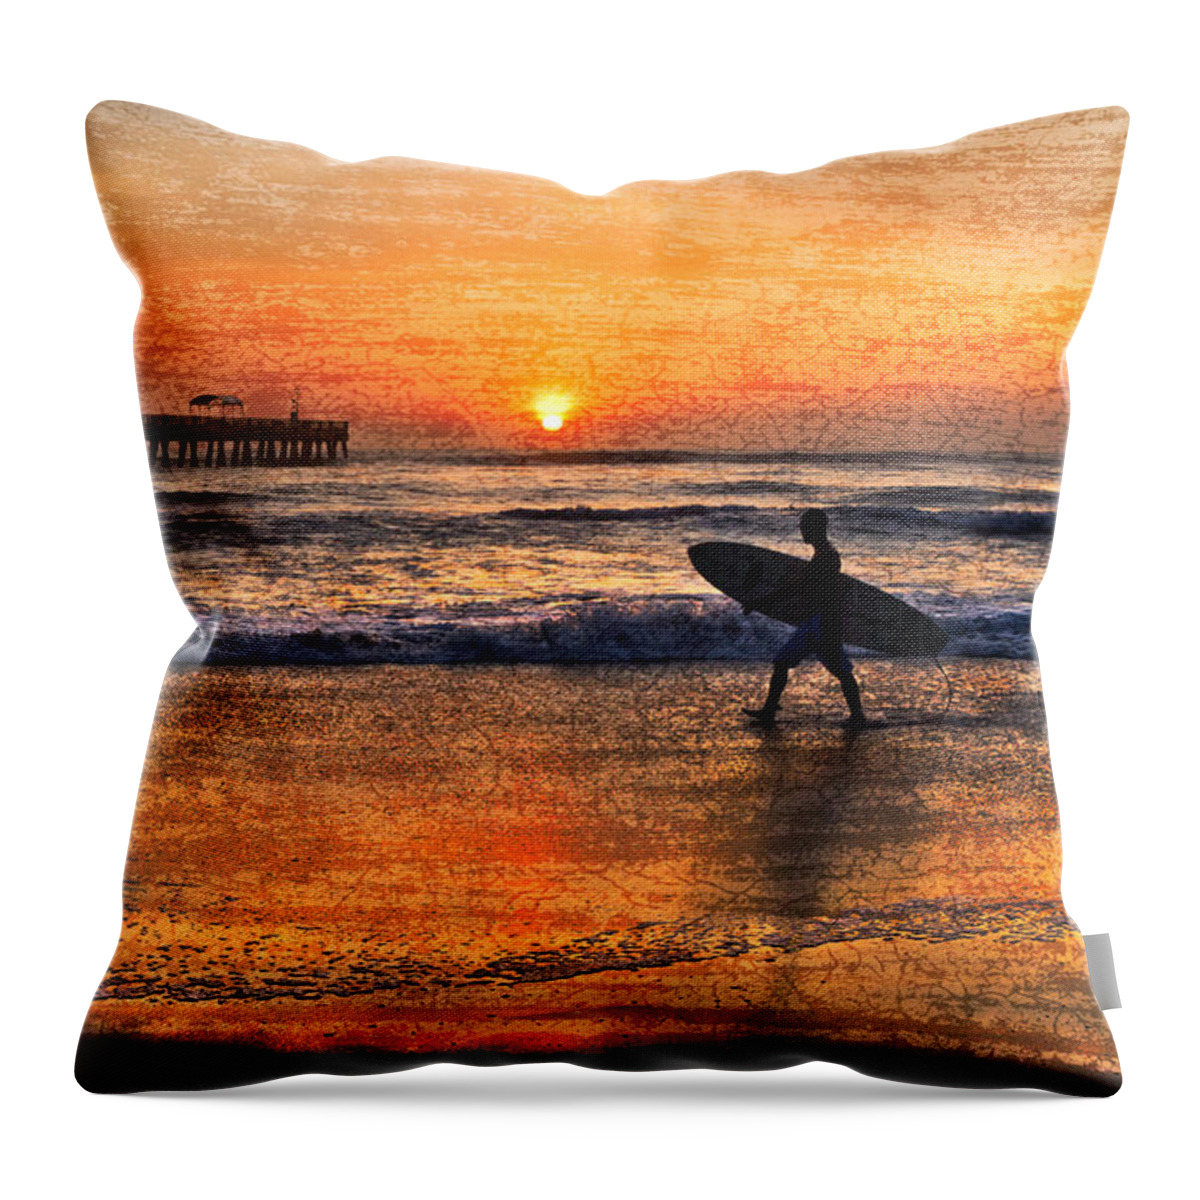 Benny's Throw Pillow featuring the photograph Morning Surf by Debra and Dave Vanderlaan